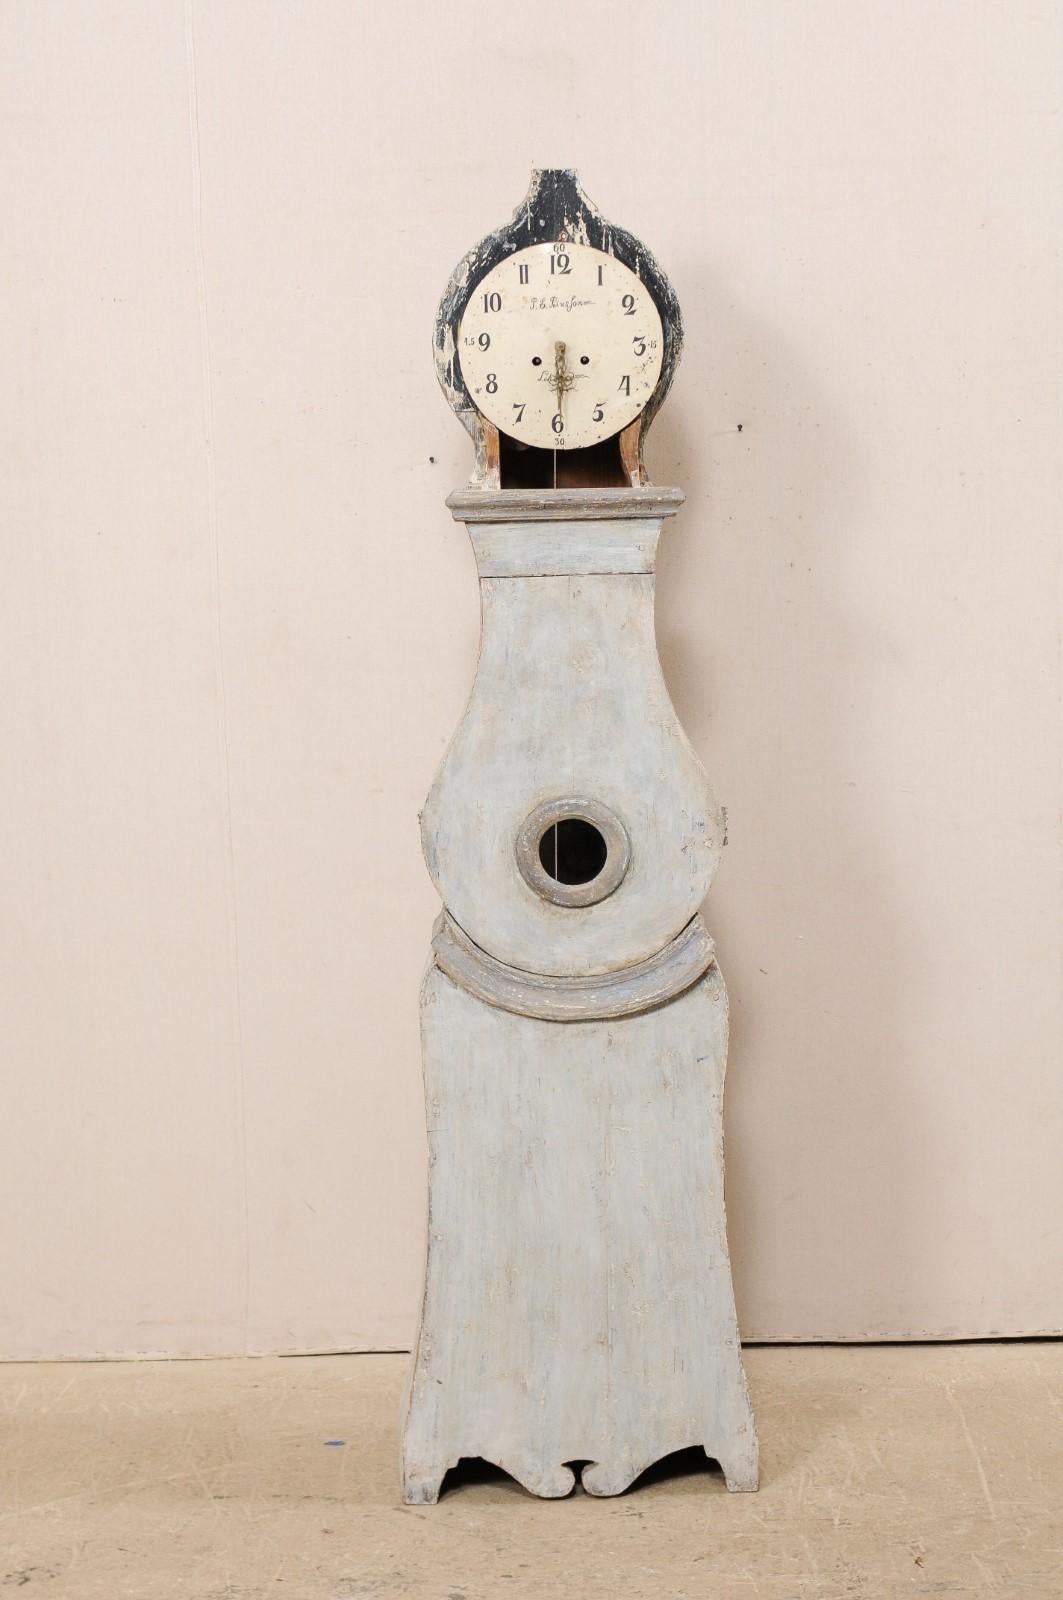 Swedish Fryksdahl Carved and Painted Wood Floor Clock in Blue and Gray Color 1